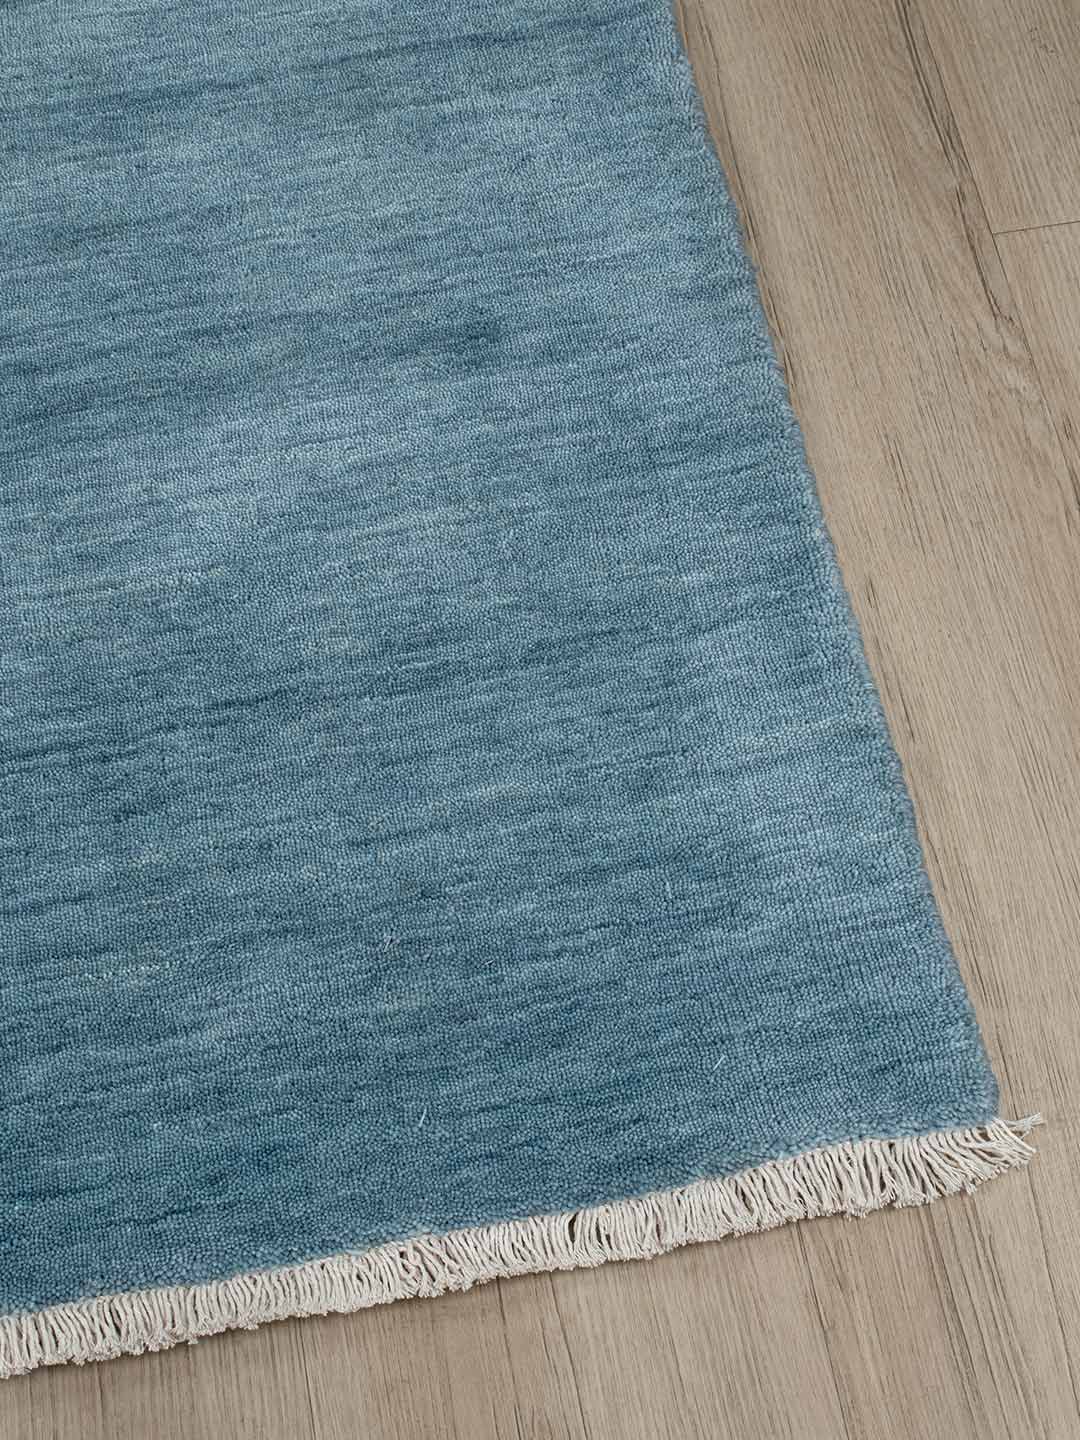 Diva Sky Blue Rug 20% off from the Rug Collection Stockist Make Your House A Home, Furniture Store Bendigo. Free Australia Wide Delivery